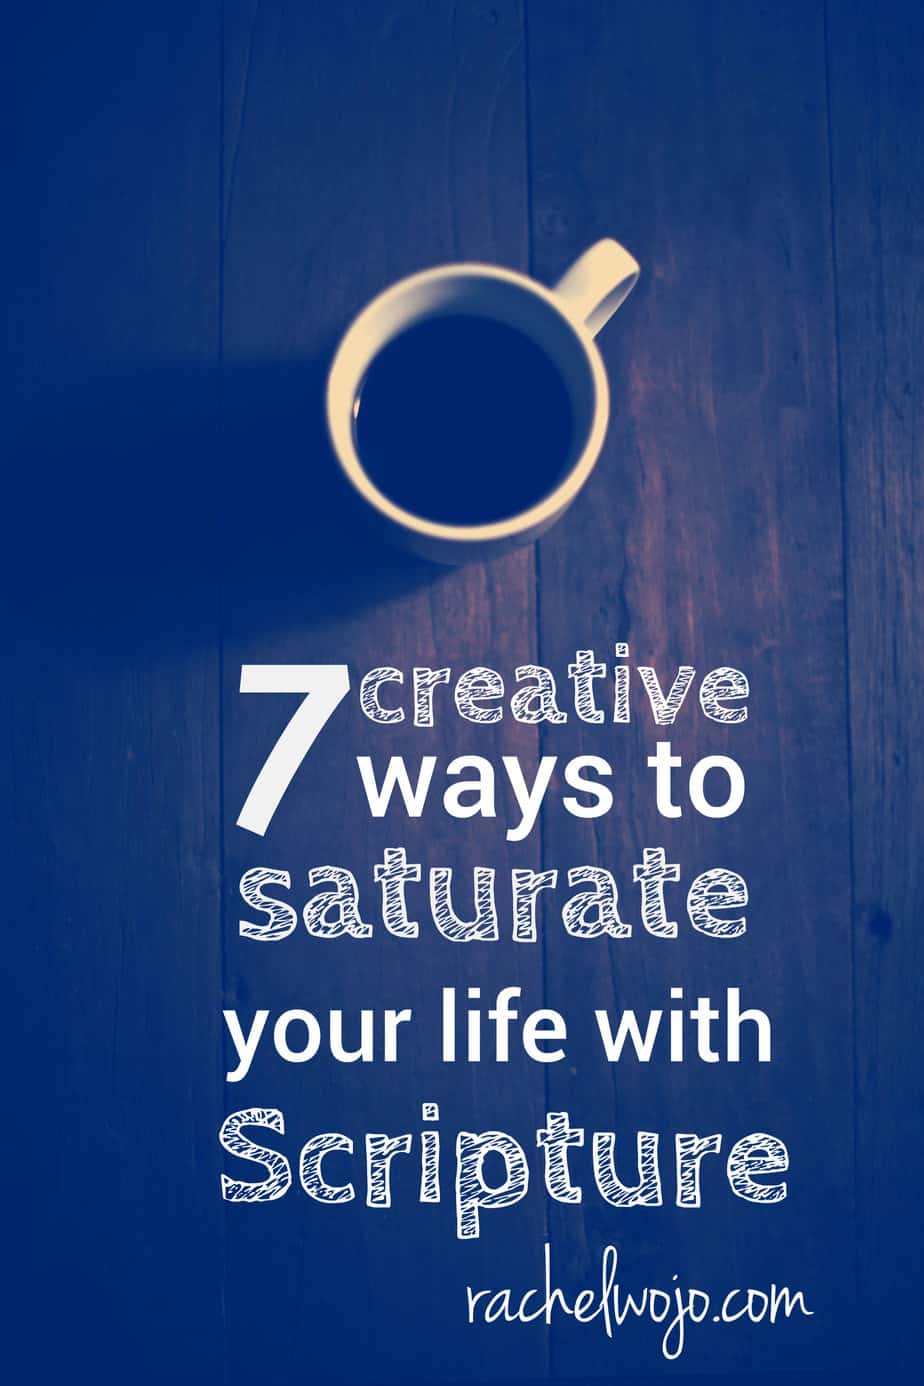 ways to saturate scripture